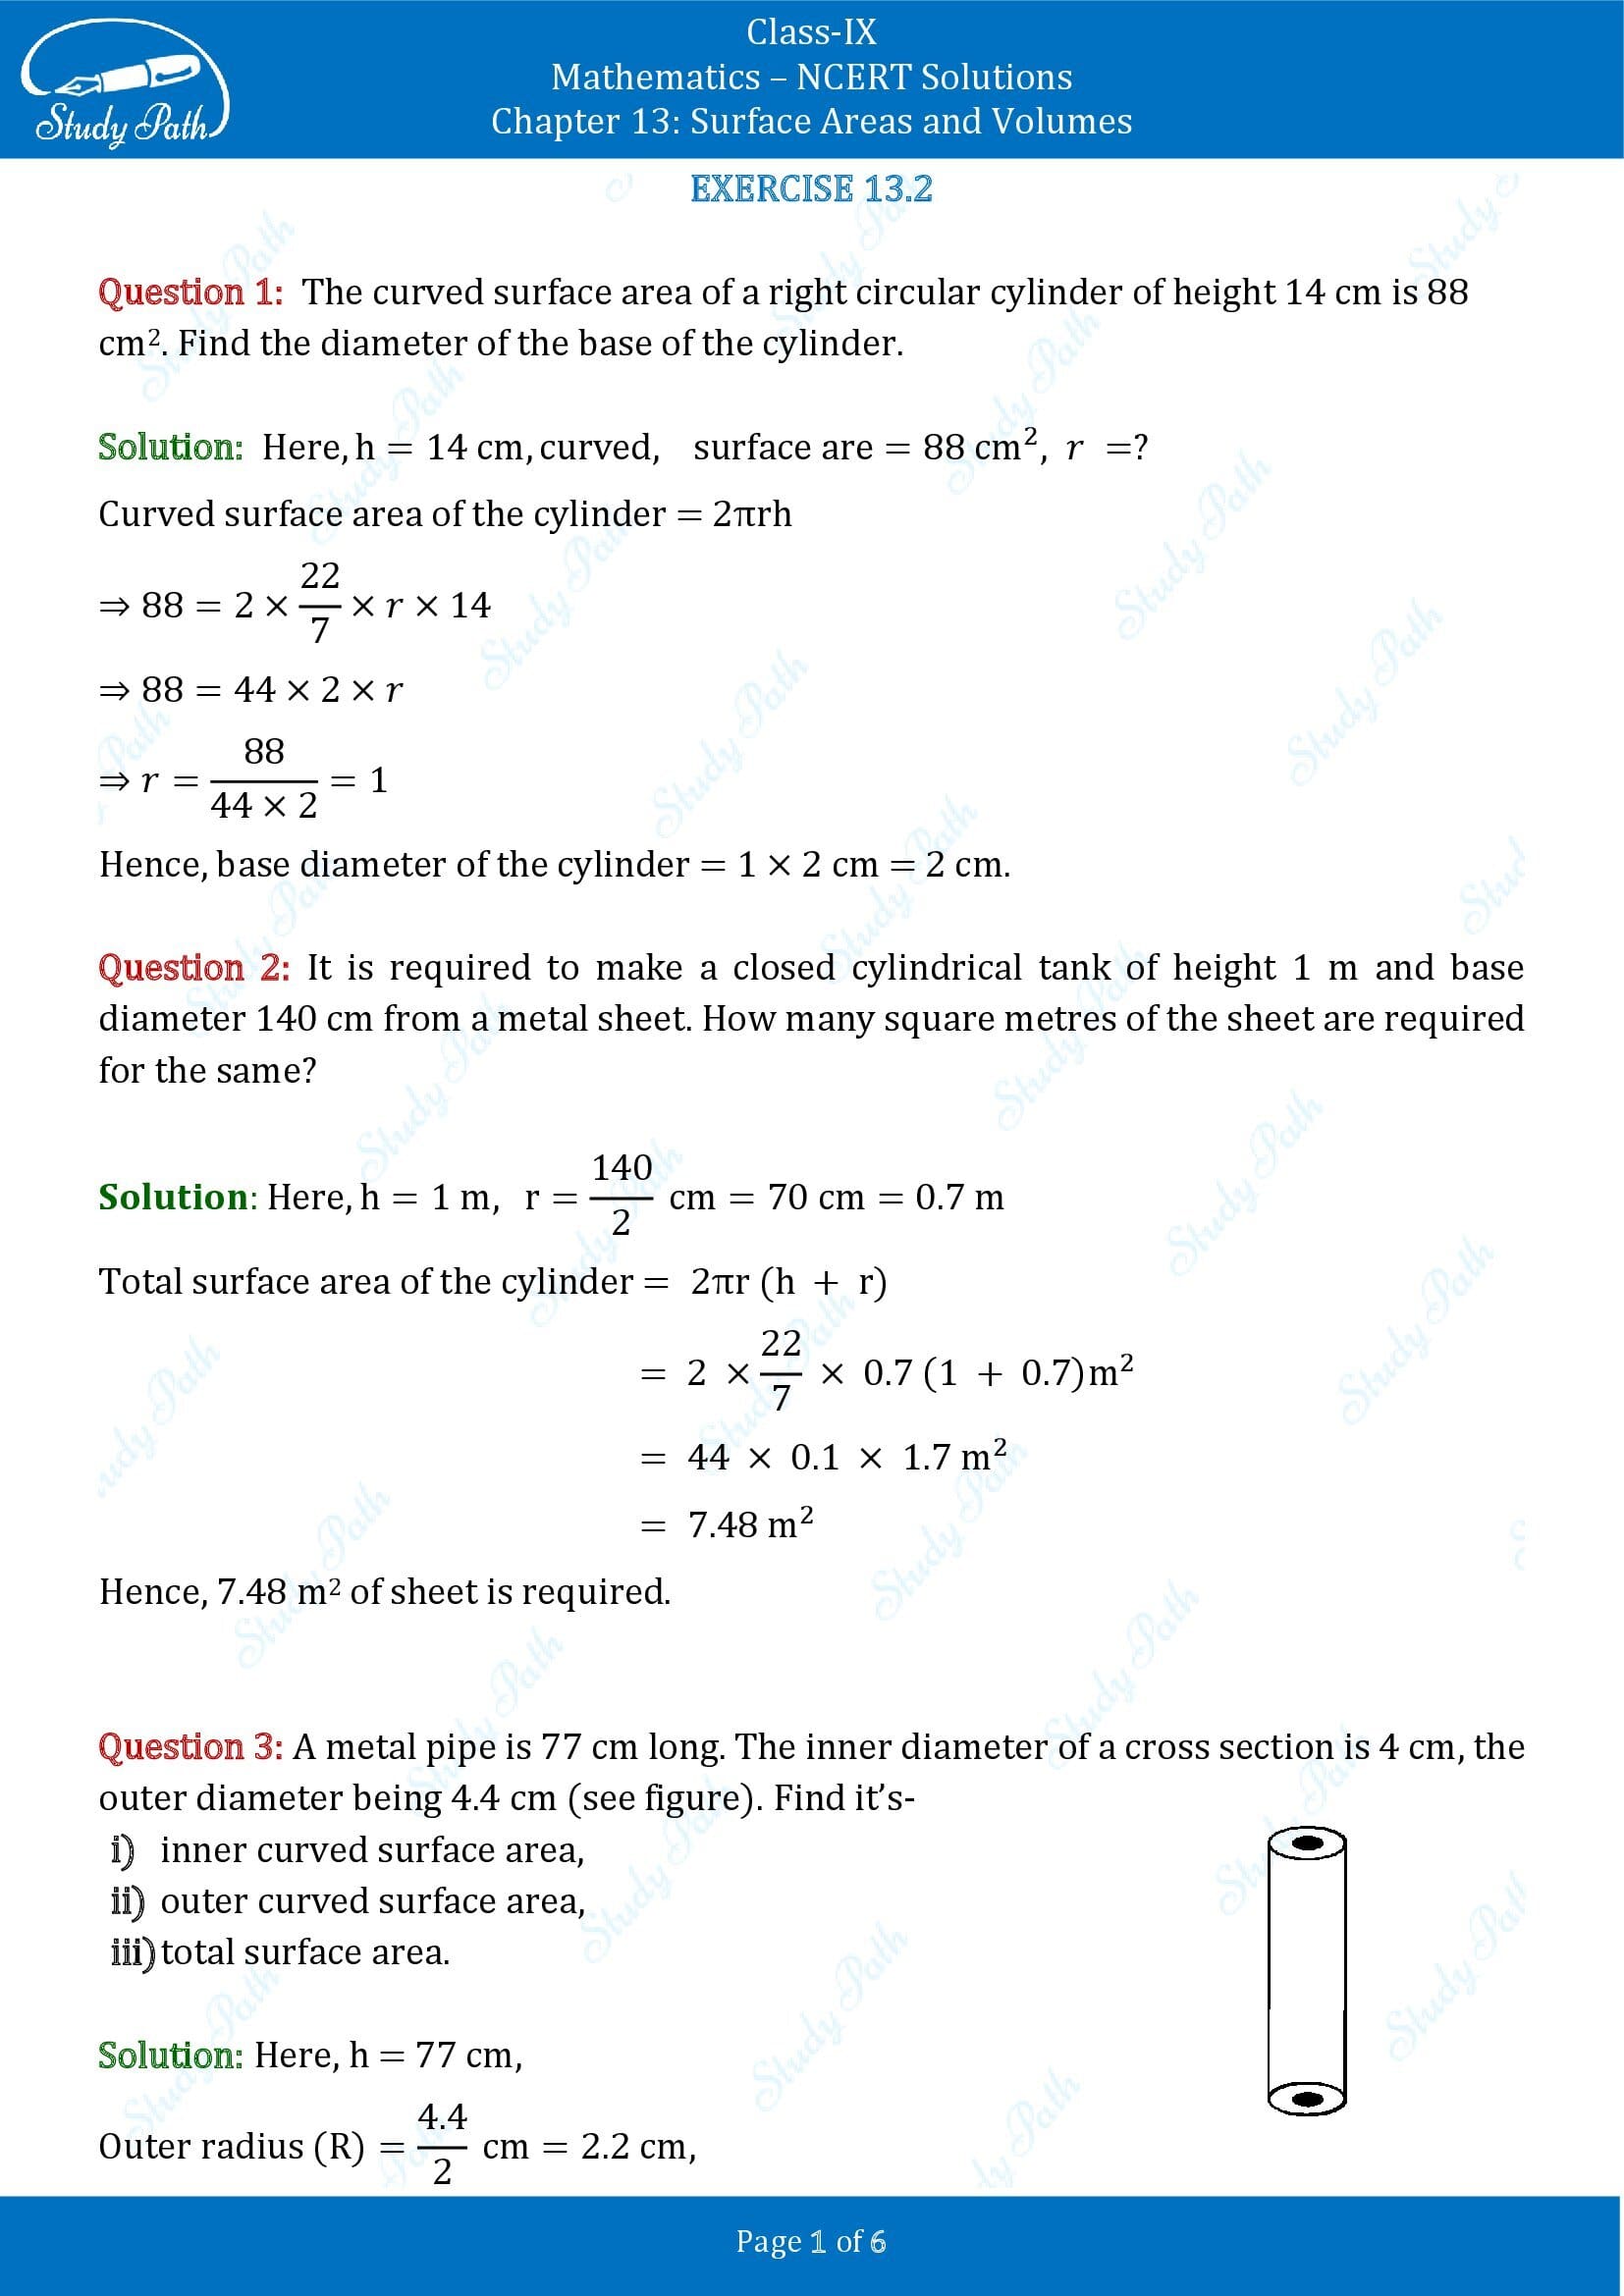 NCERT Solutions for Class 9 Maths Chapter 13 Surface Areas and Volumes Exercise 13.2 00001